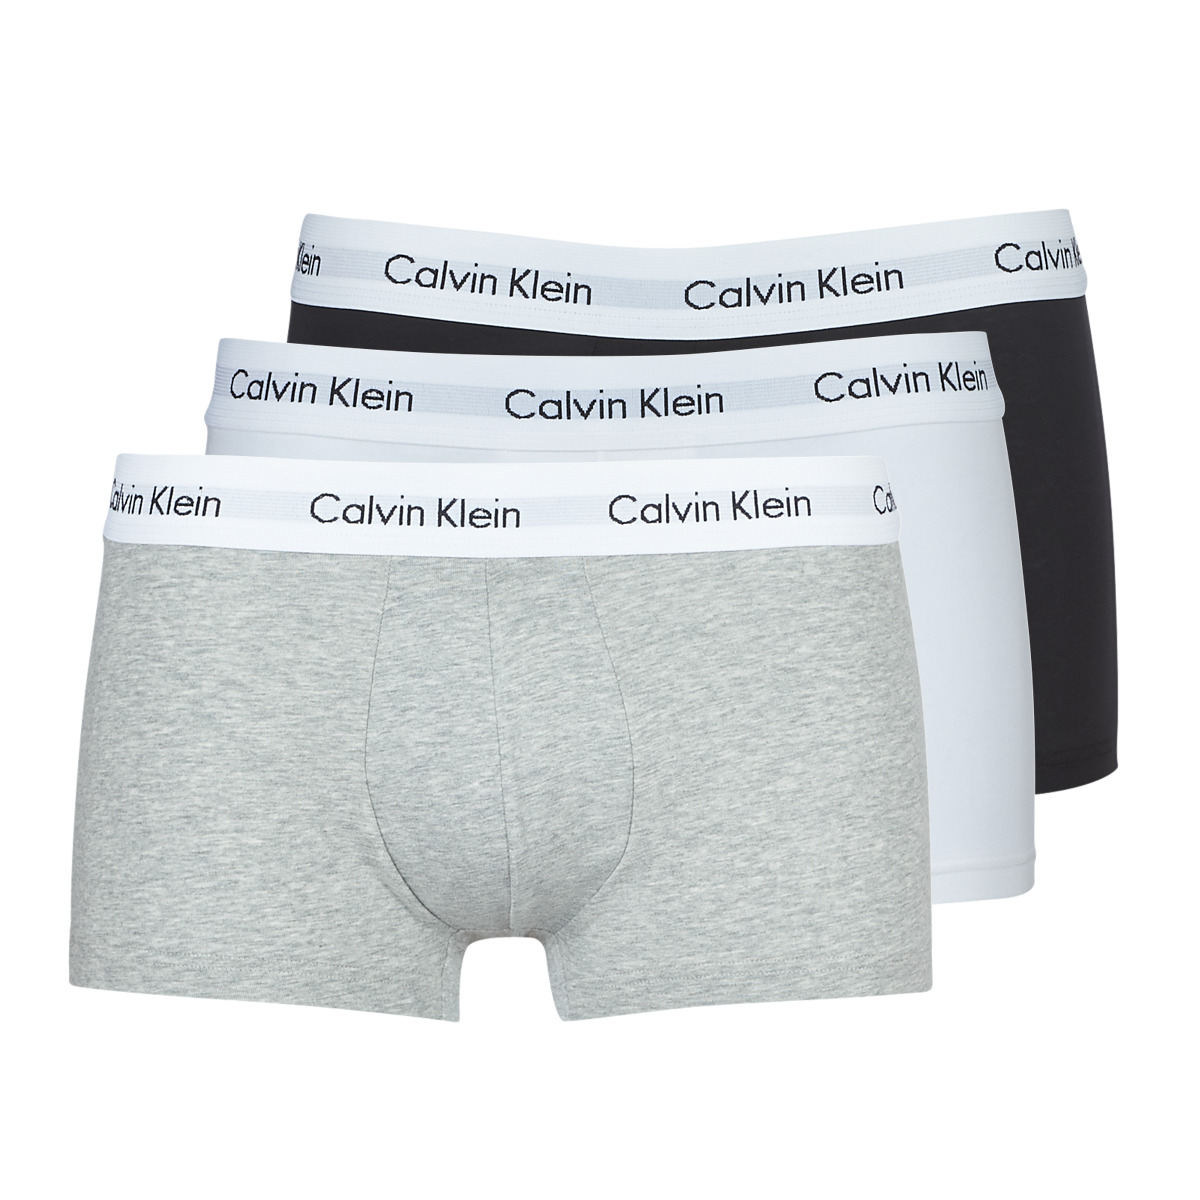 Calvin Klein Jeans COTTON STRECH LOW RISE TRUNK X 3 Black / White / Grey /  Mottled - Free delivery